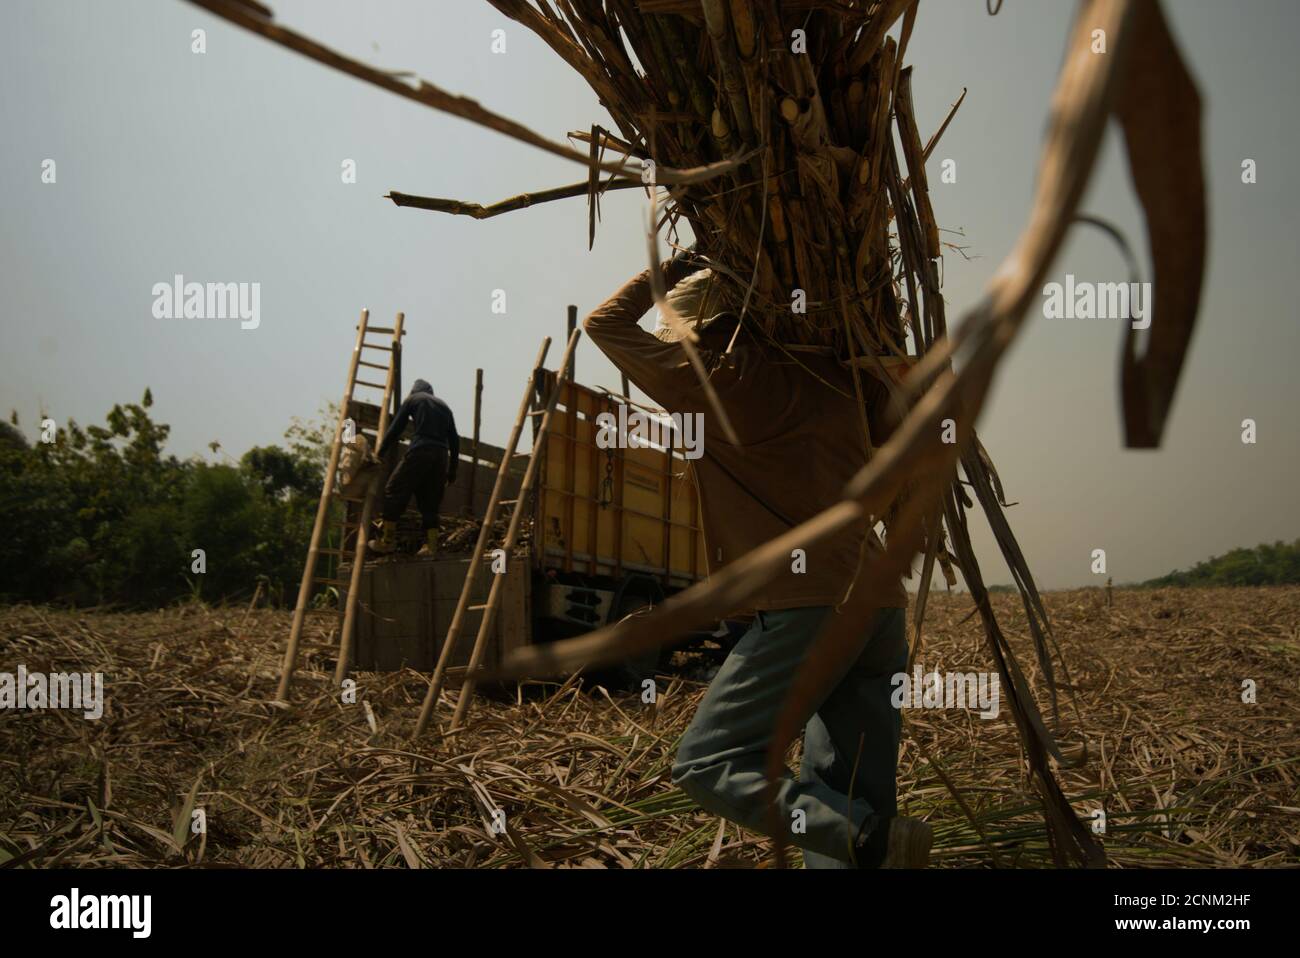 Workers loading freshly harvested sugarcanes onto a truck, at an agricultural field operated to supply Tasikmadu Sugar Mill in Central Java, Indonesia. Stock Photo